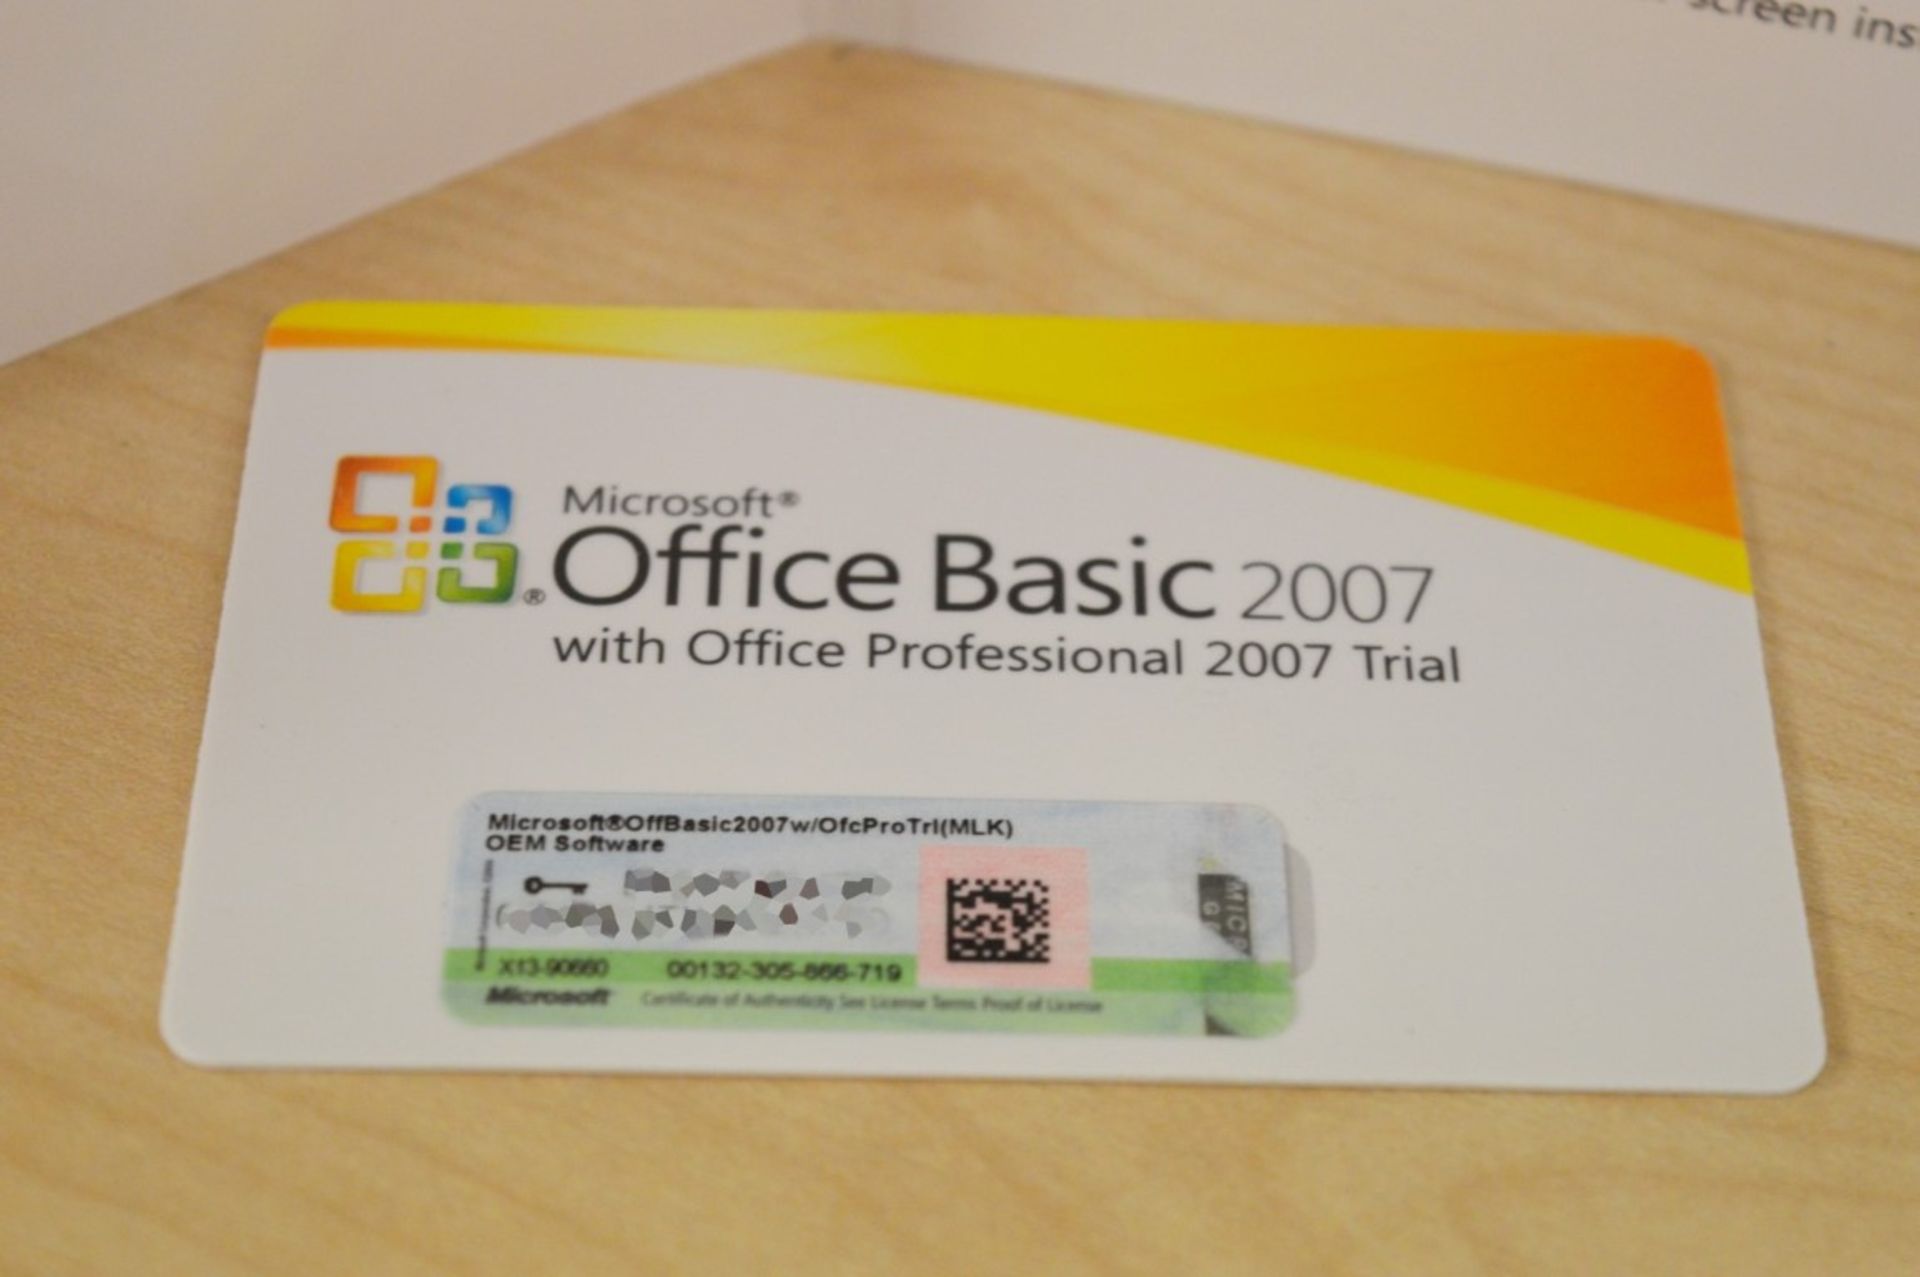 1 x Microsoft Office 2007 Basic COA - Features Word, Excel and Outlook - CL300 - Location: Altrincha - Image 2 of 2